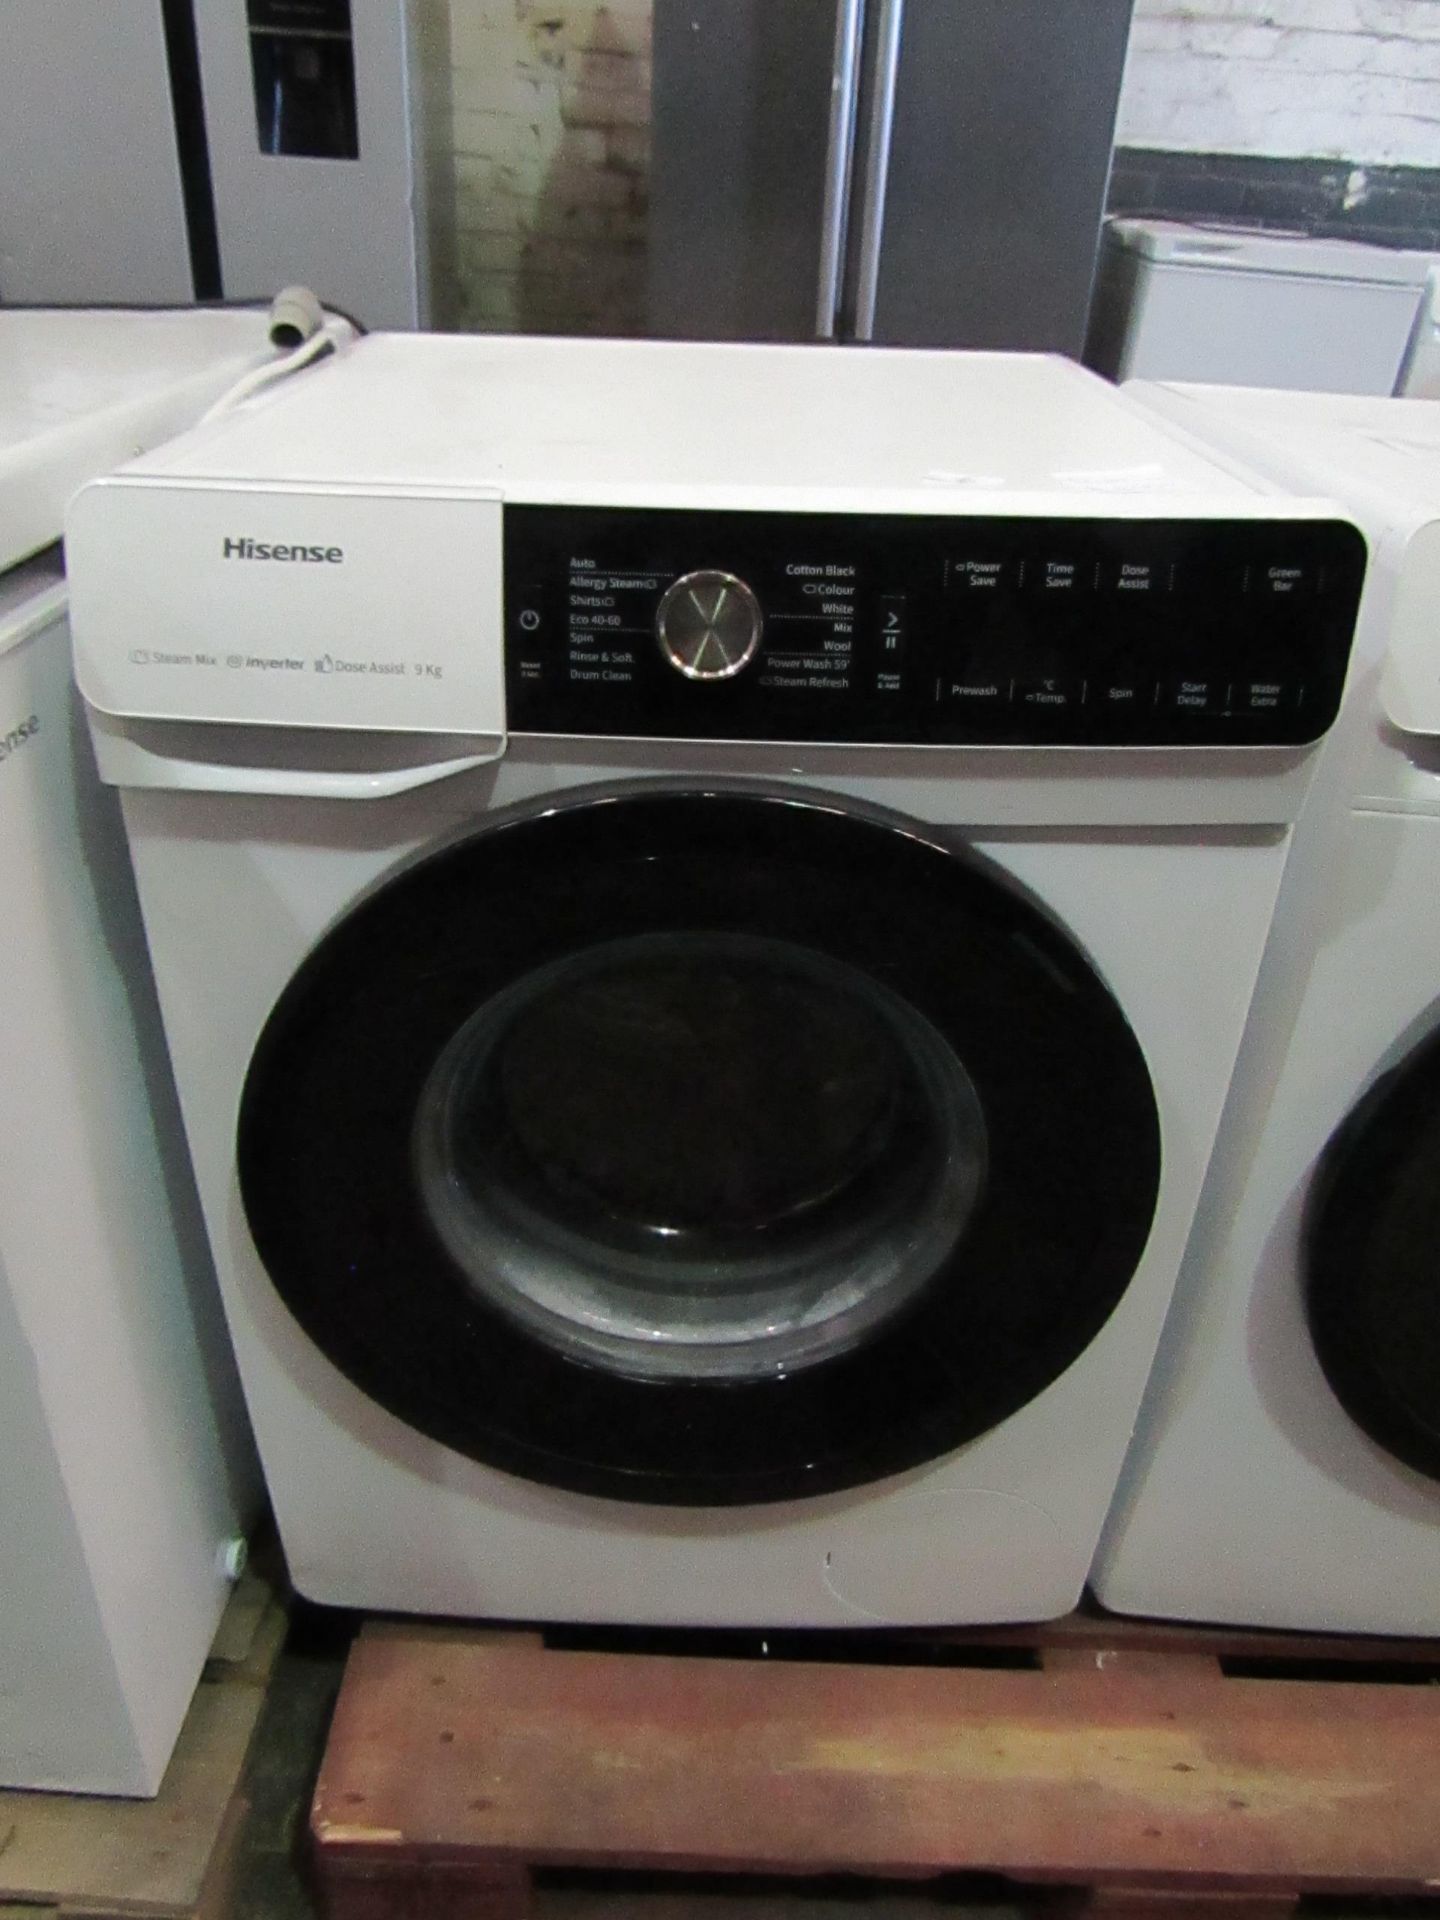 hisense 9kg washing machine, powers ona dn spins but we havent connected it to water to check any